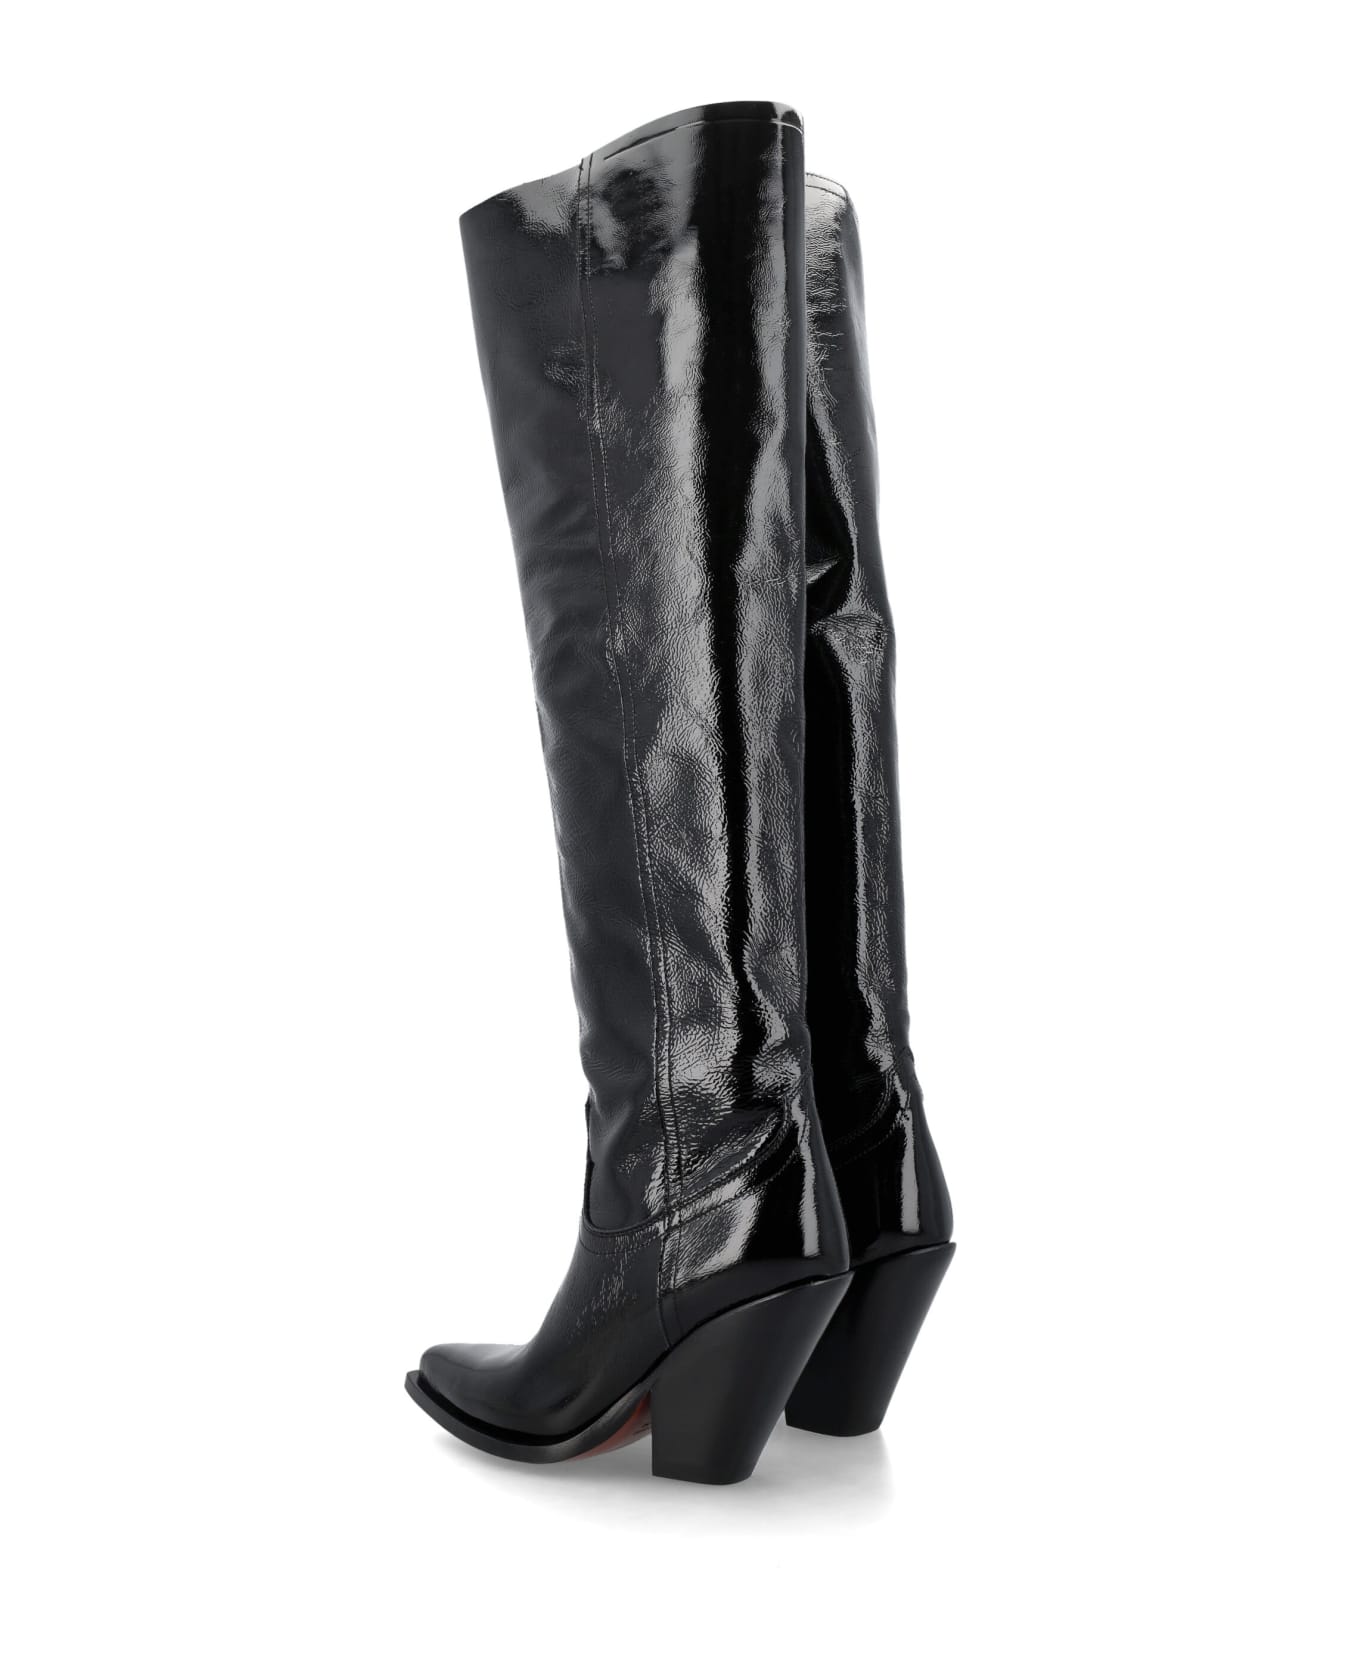 Sonora Acapulco Naplack Over-the-knee Boots - BLACK